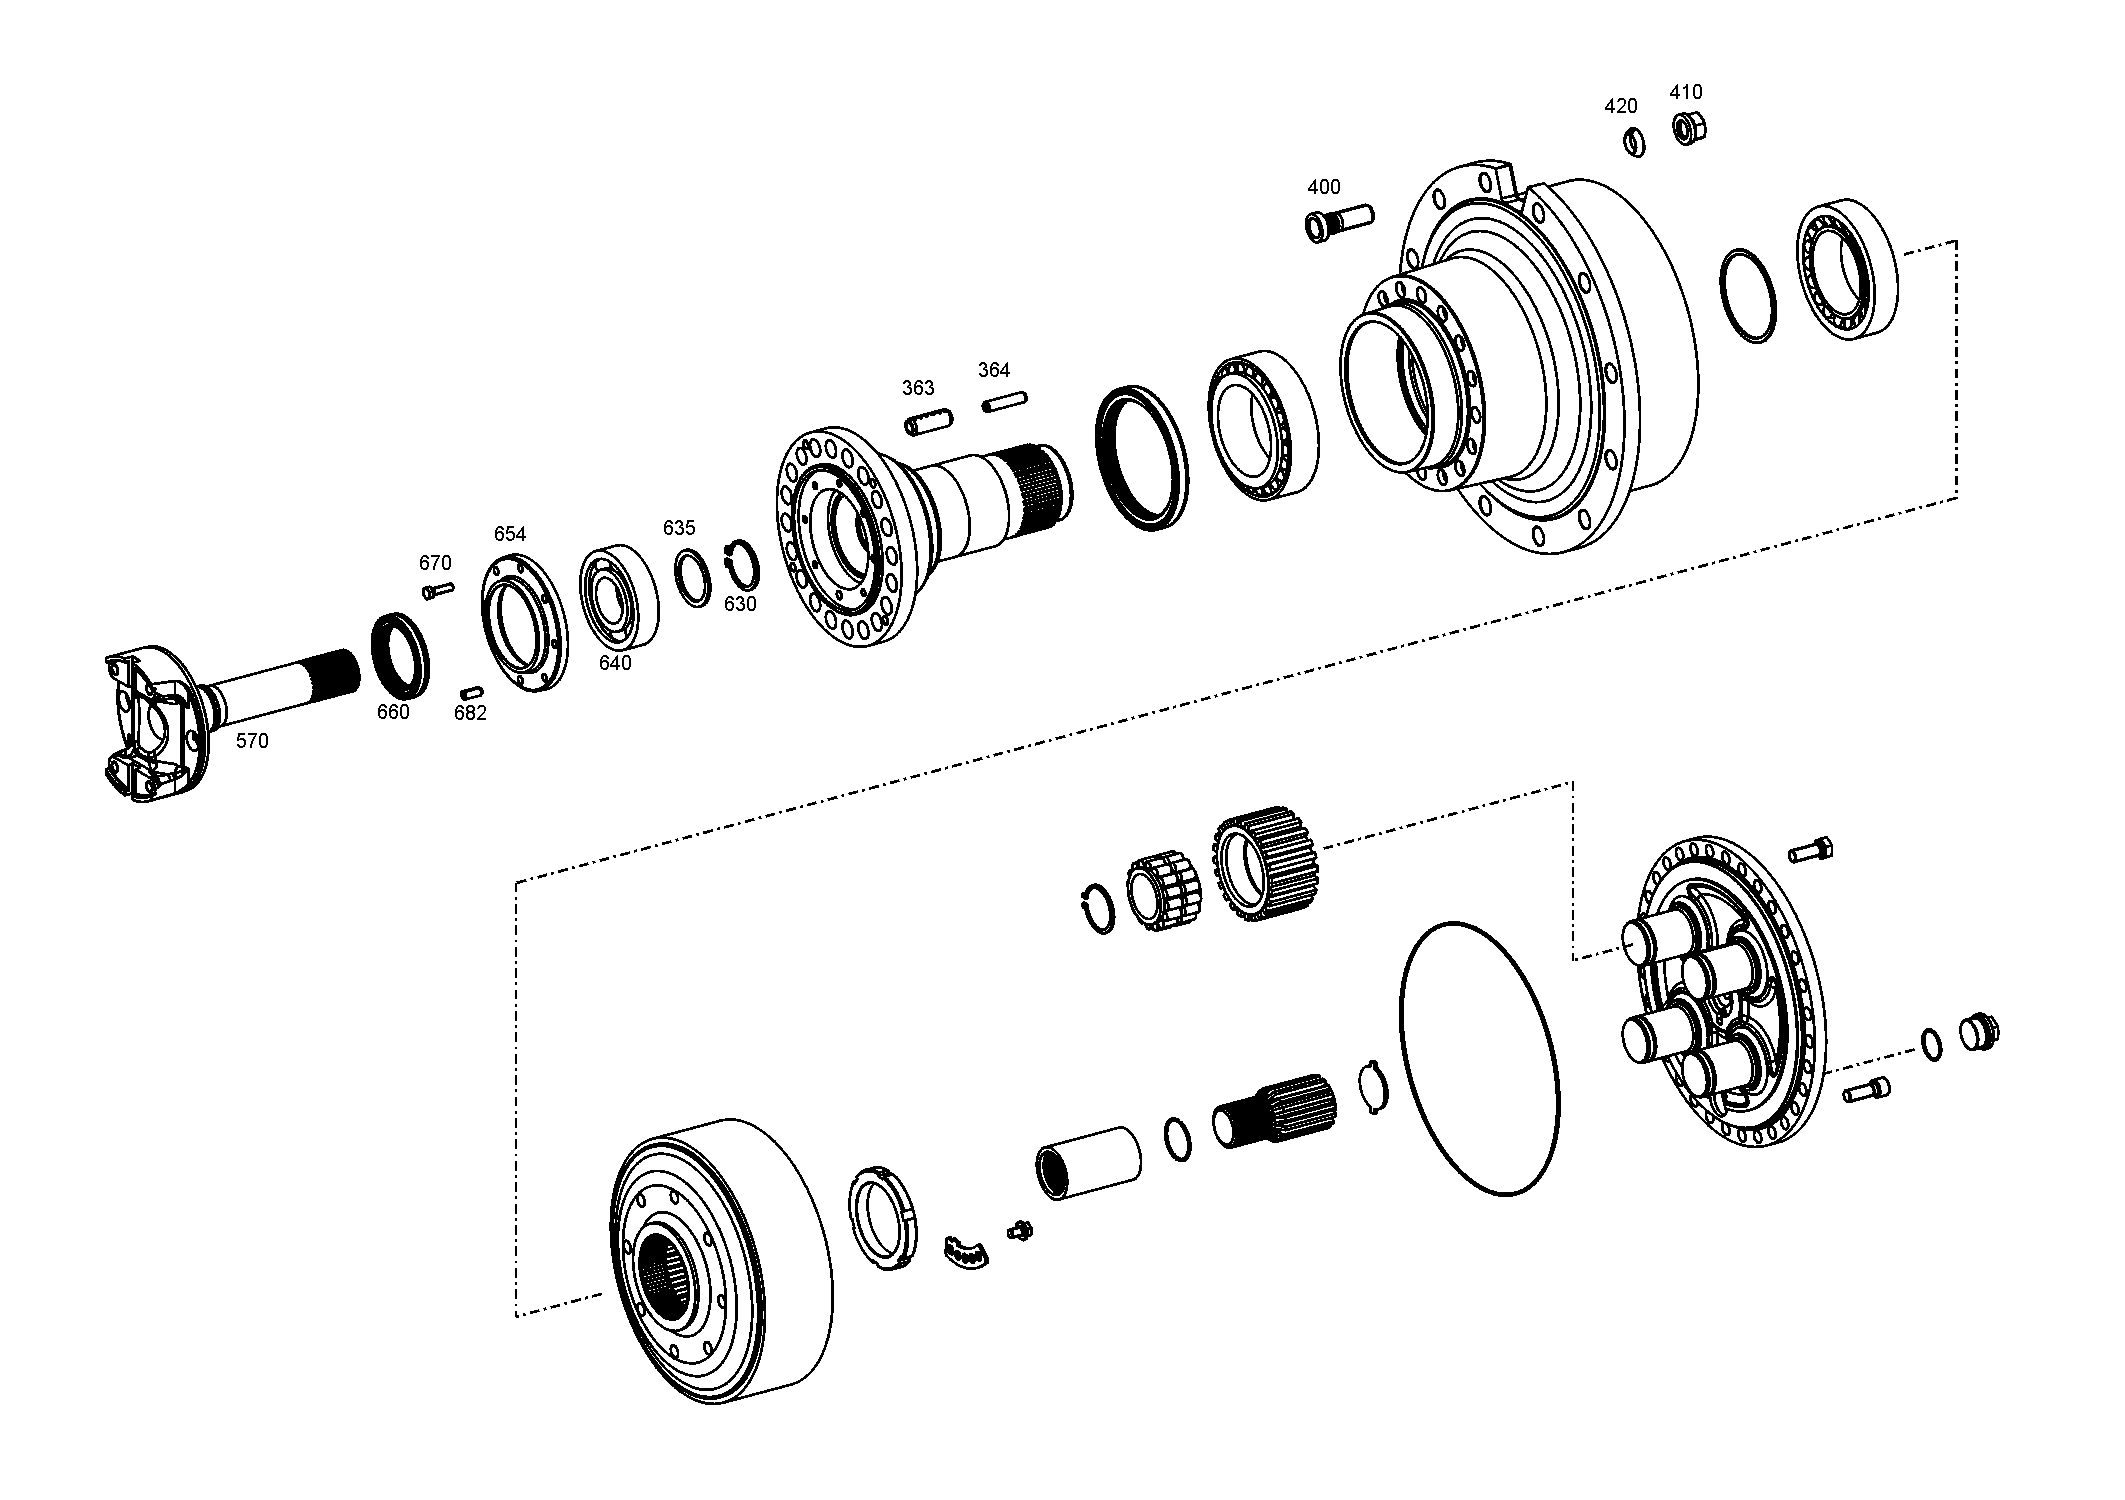 drawing for TIMONEY TECHNOLOGIE LTD. 8083002 - SPRING WASHER